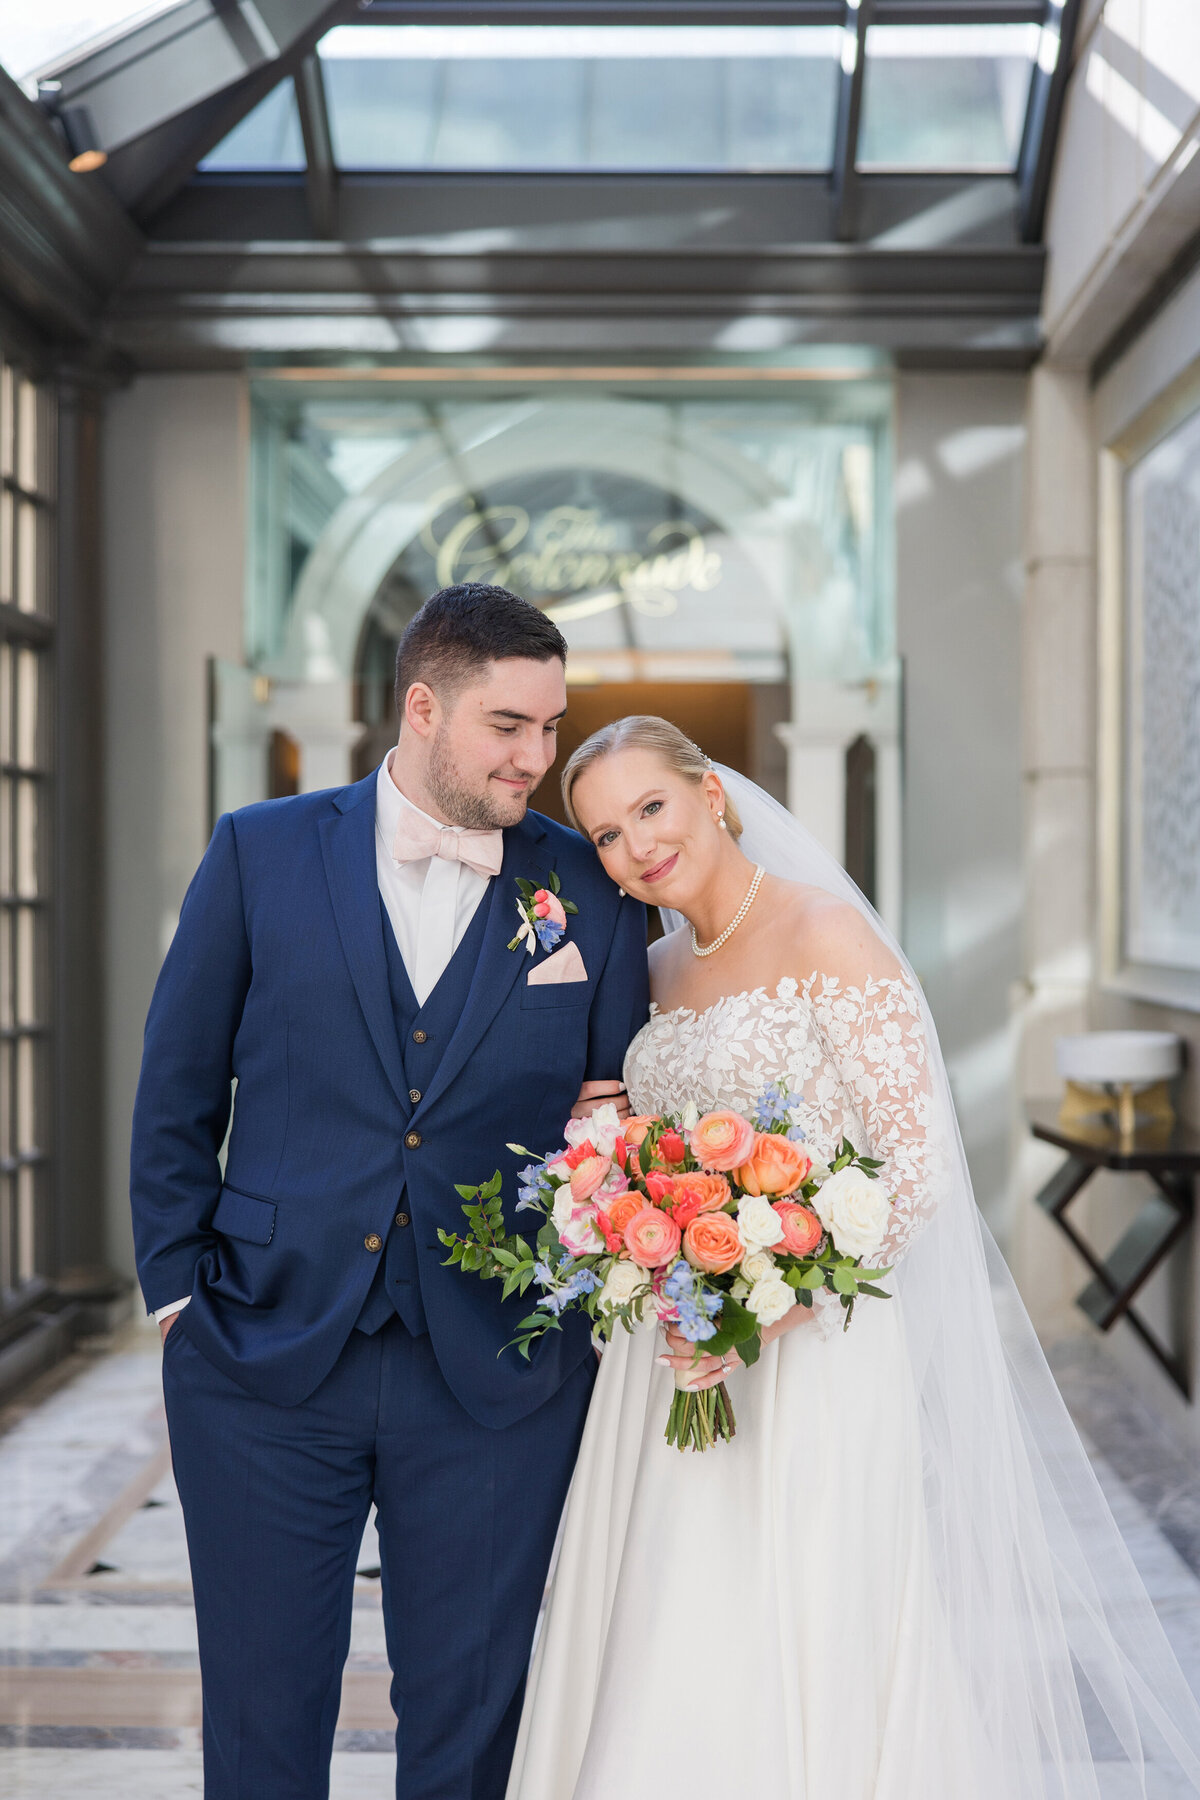 Fairmont Hotel Georgetown Washington, DC spring wedding photo of bride and groom at The Colonnade by Christa Rae Photography